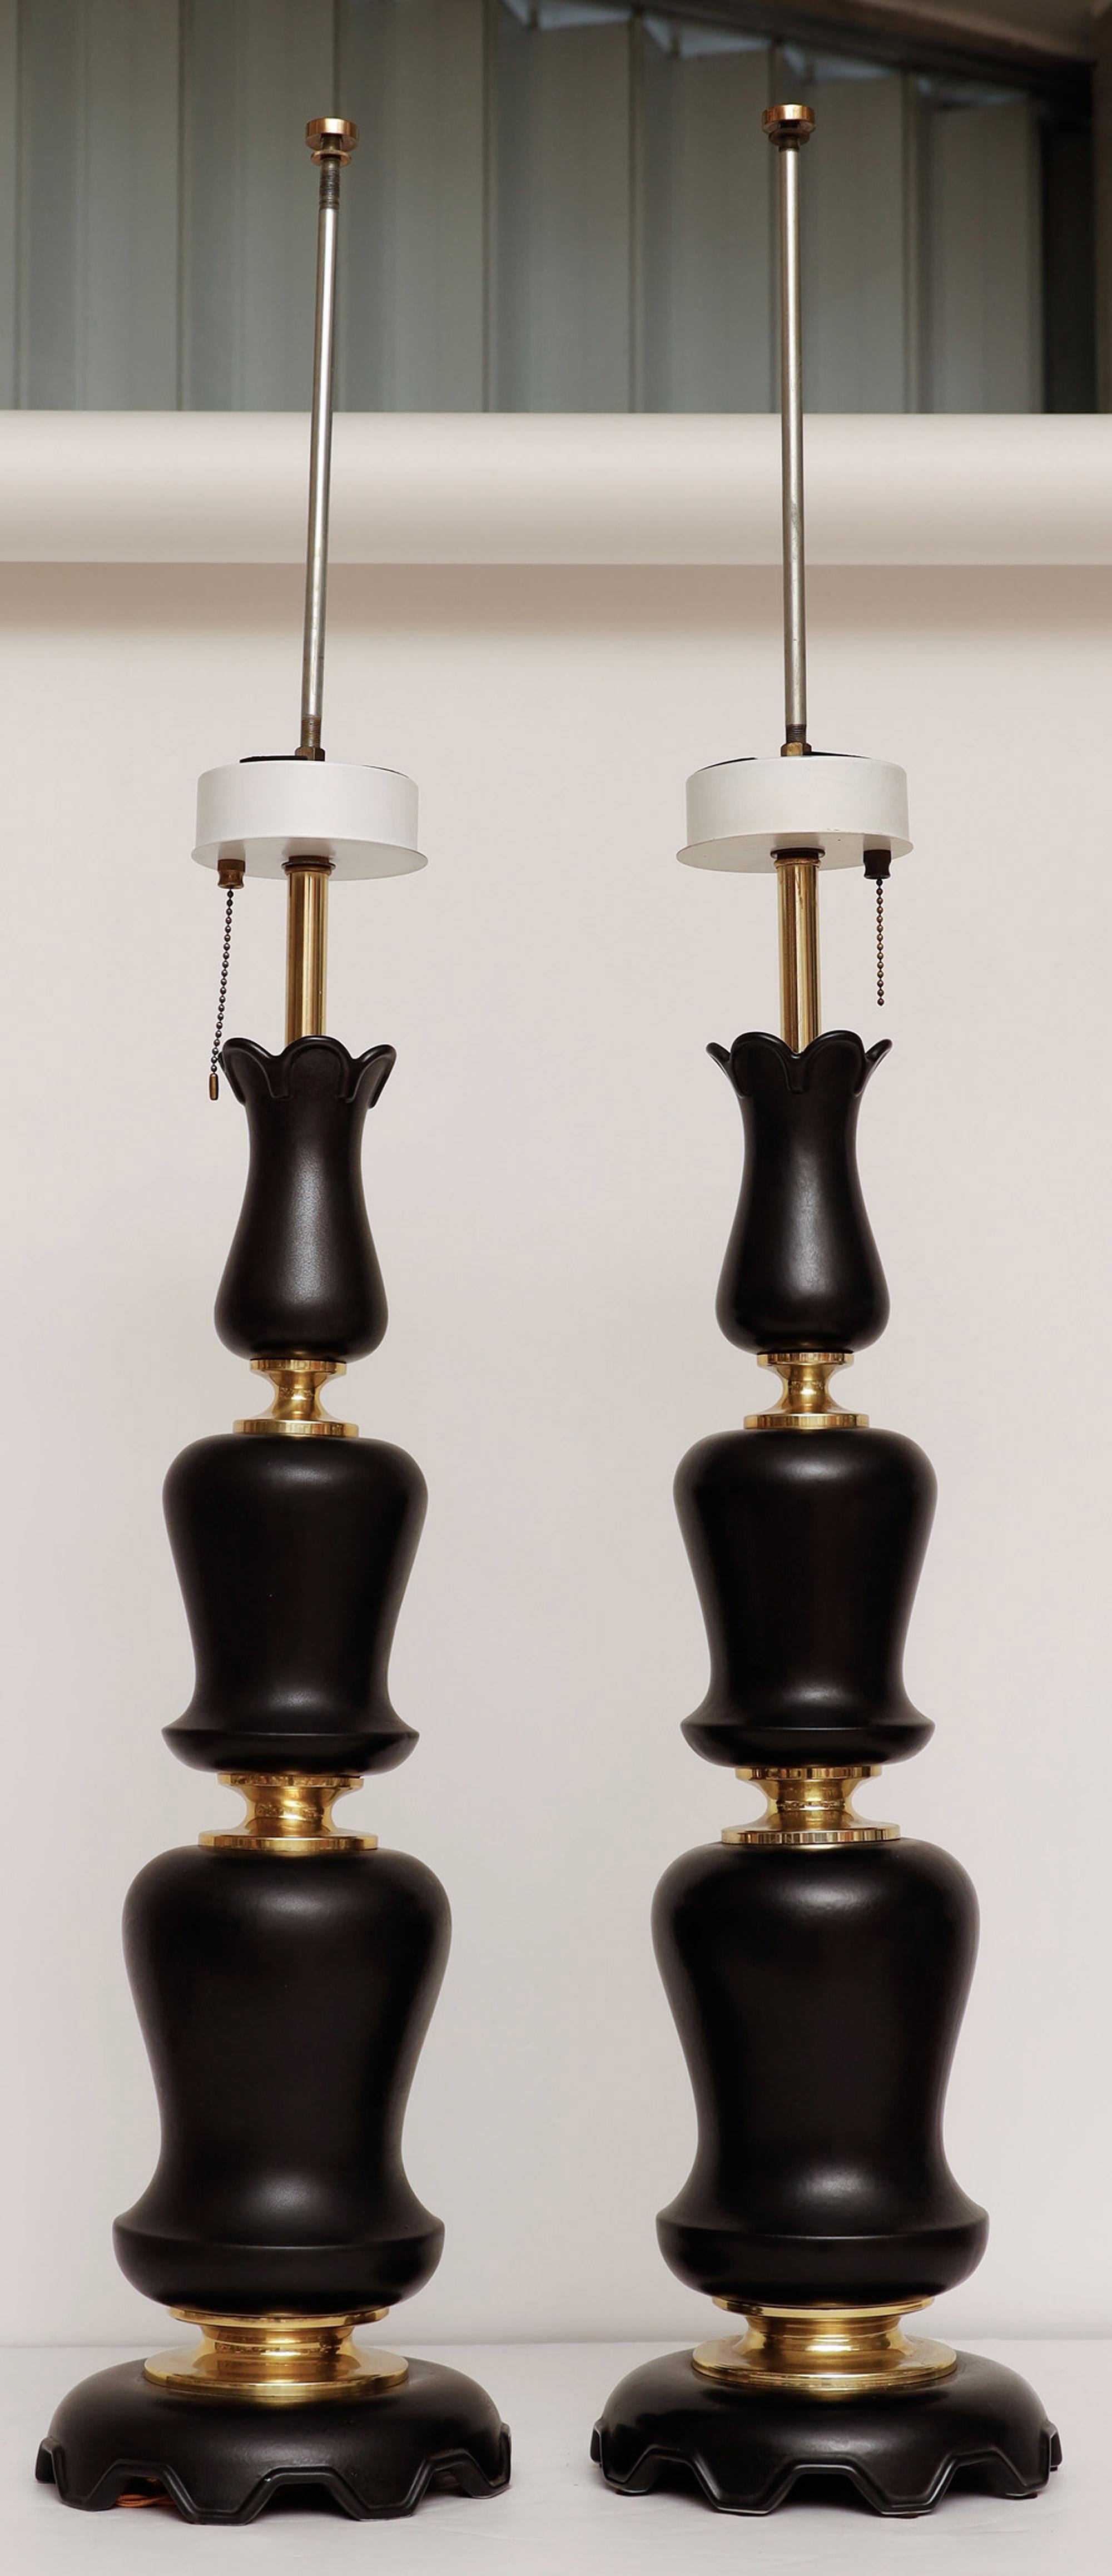 Pair of sculptural table lamps in black matte ceramic by Gerald Thurston for Lightolier.
The lamps each have three light sources and pull chain.

Very tall and elegant!